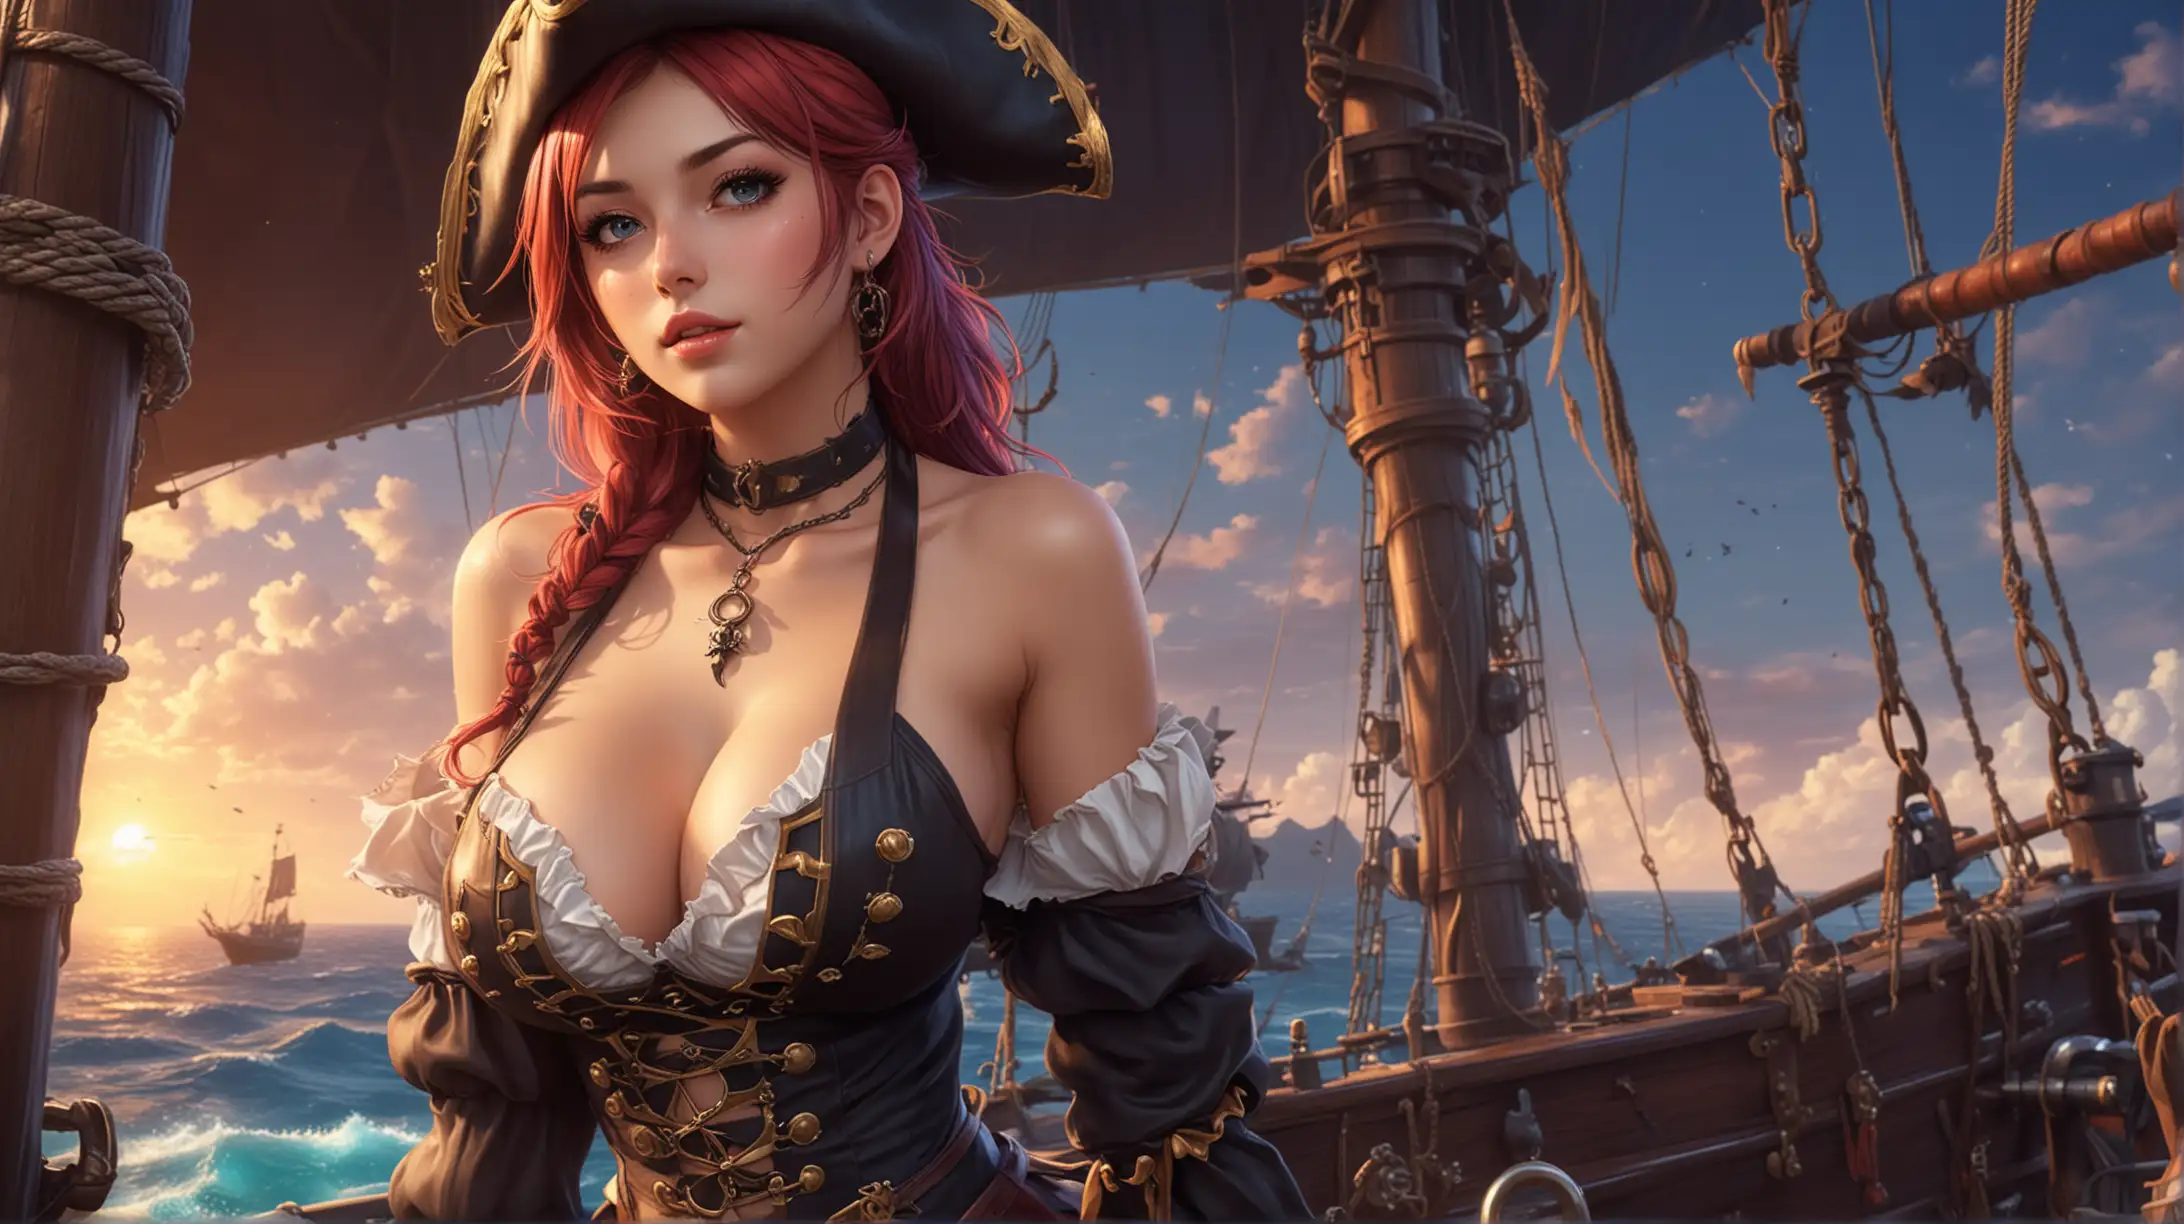 Beautiful seductive pirate anime girl, shapely busty, sexy pirate clothing, epic pirate ship background, vibrant colors